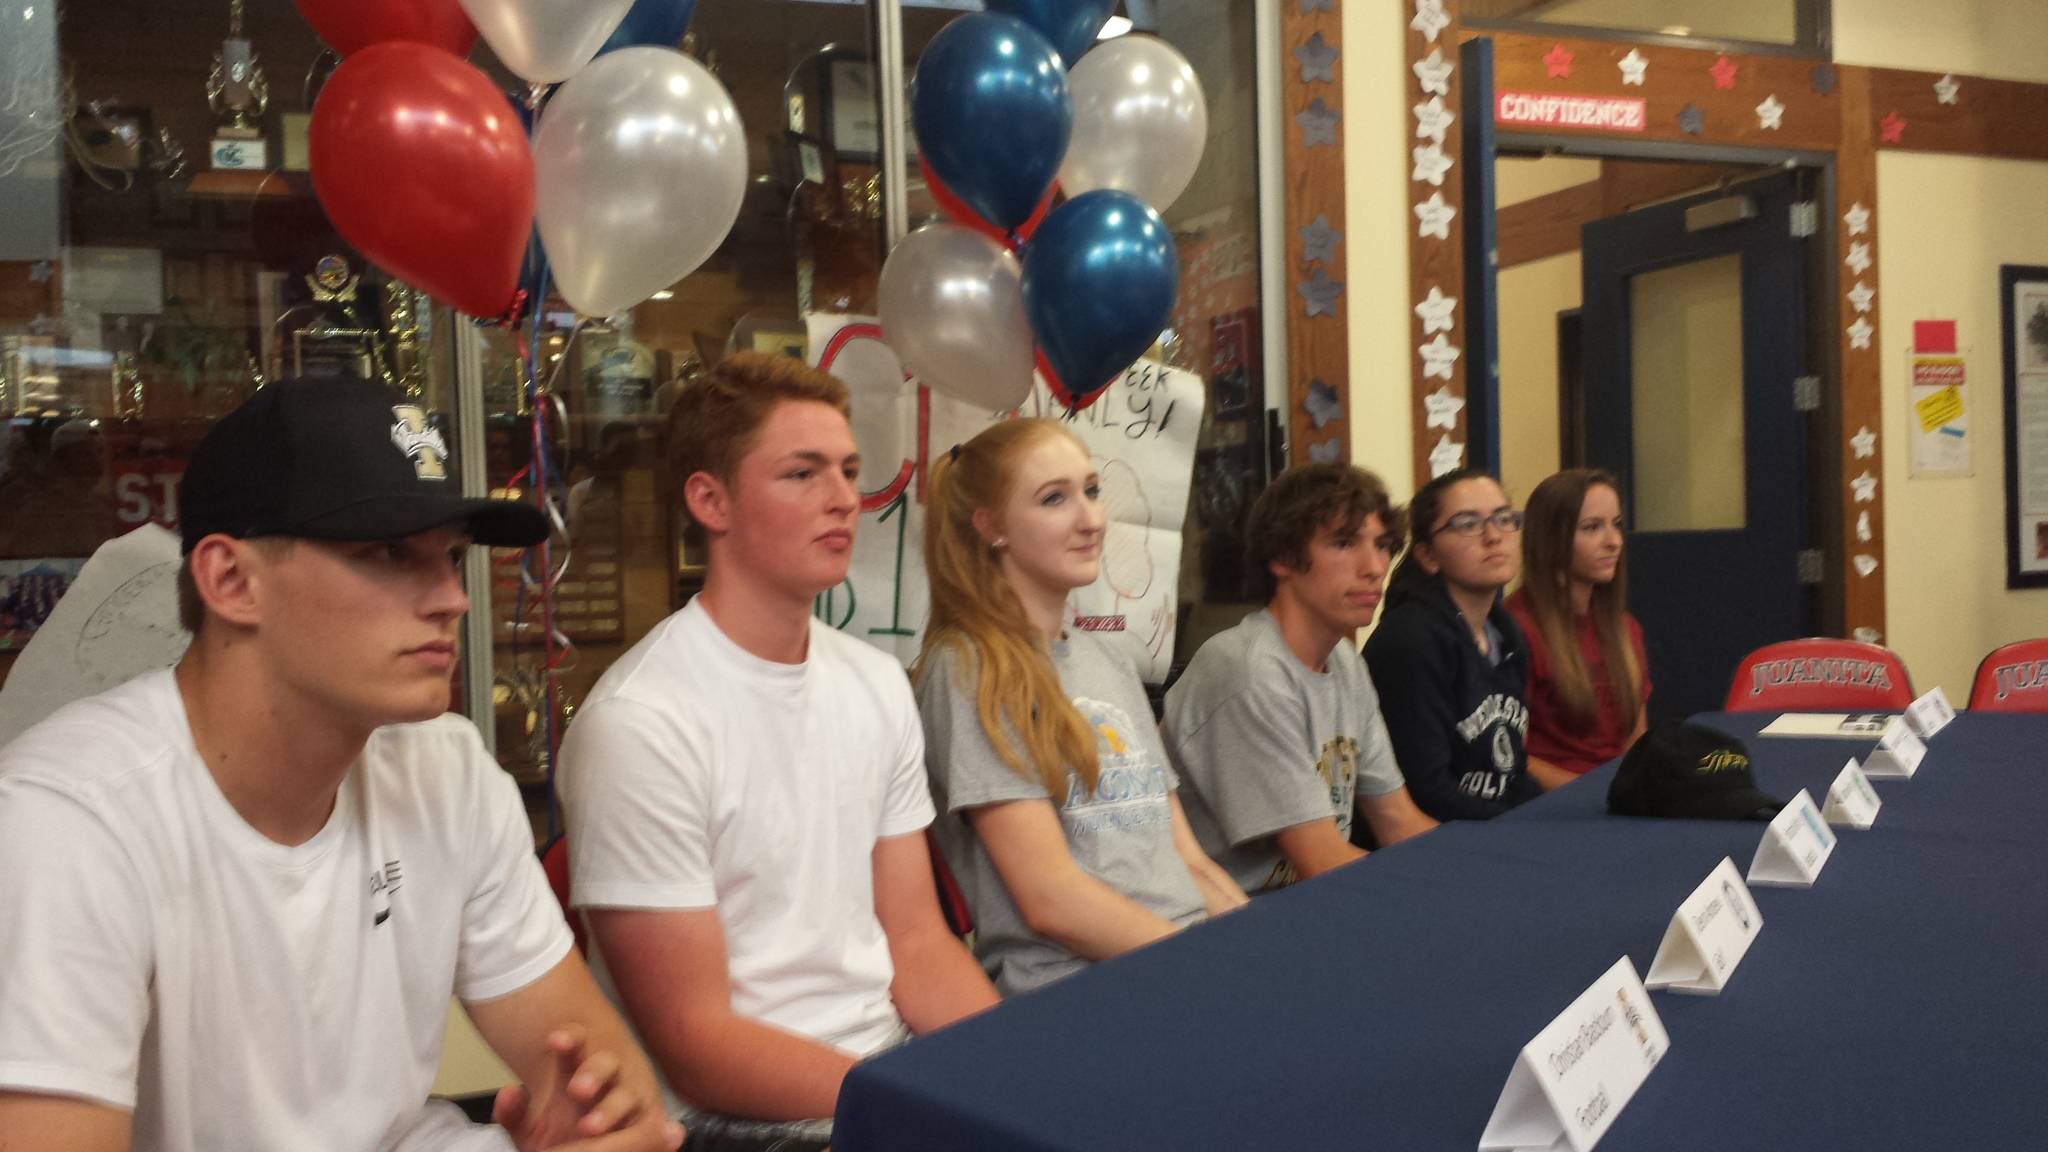 Pictured from left to right, Juanita High athletes who will play in college: Christian Blackburn, Devin Andrews, Brittany White, Michael Gengo, Tatum Kawabata and Brynn Radke. Not pictured, Ravi Regan Hughes. Courtesy of Kim Blackburn